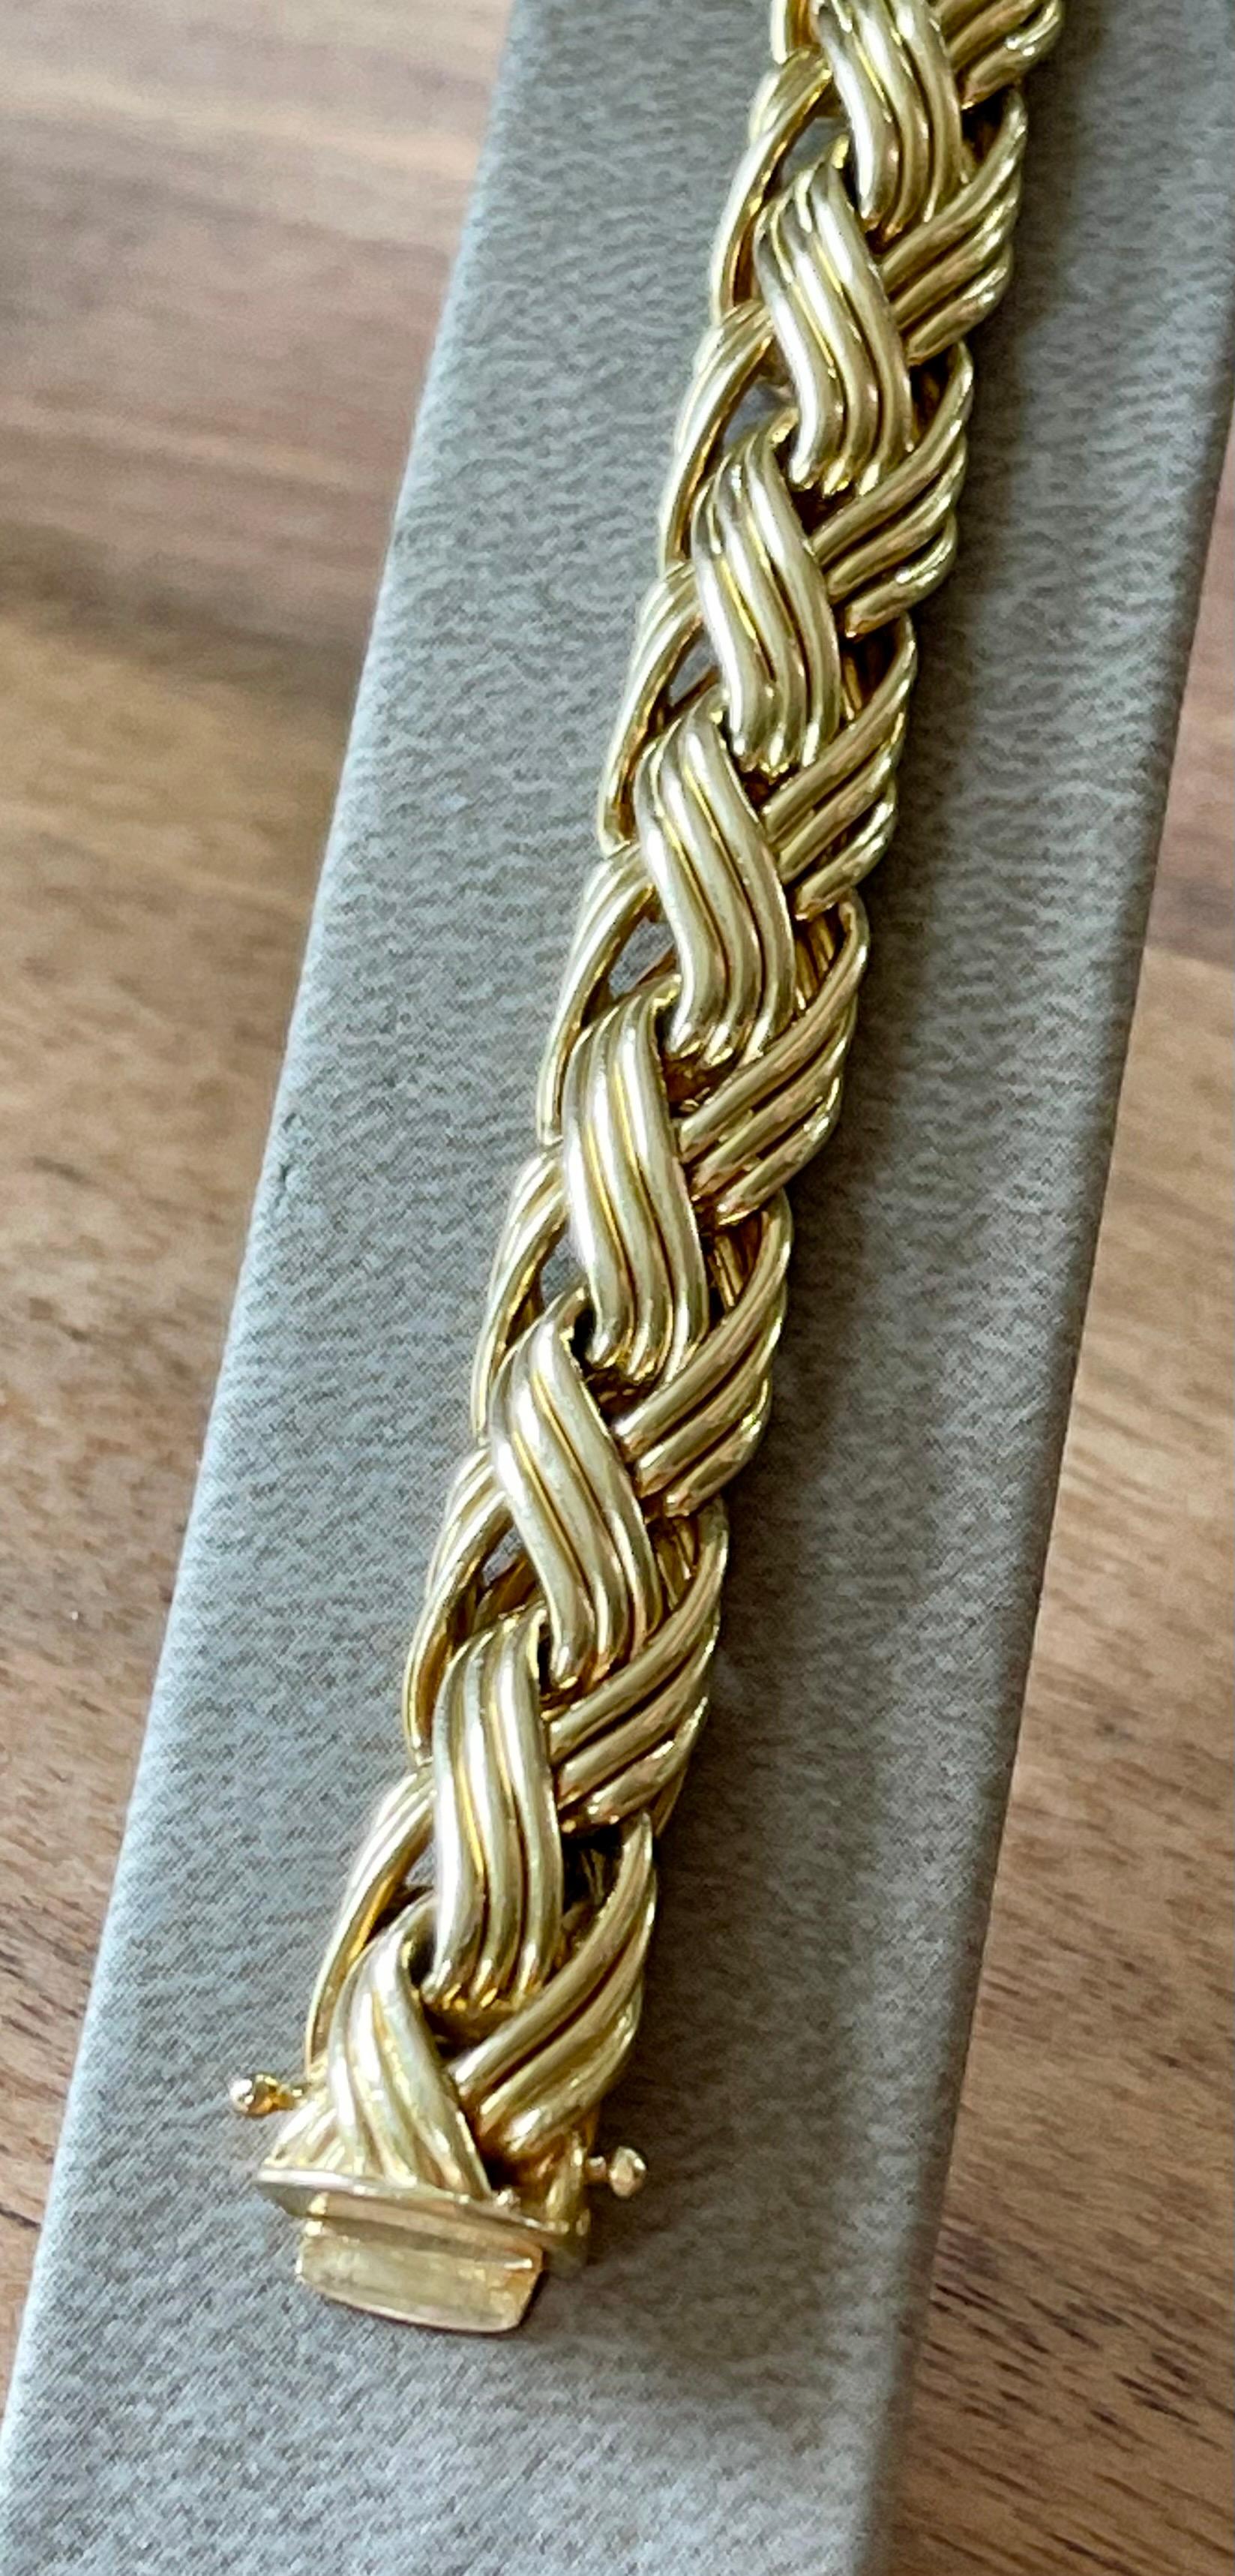 Women's or Men's Vintage 18 K Yellow Gold Cable Knit Neckalce and Bracelet Signed Meister Zurich For Sale